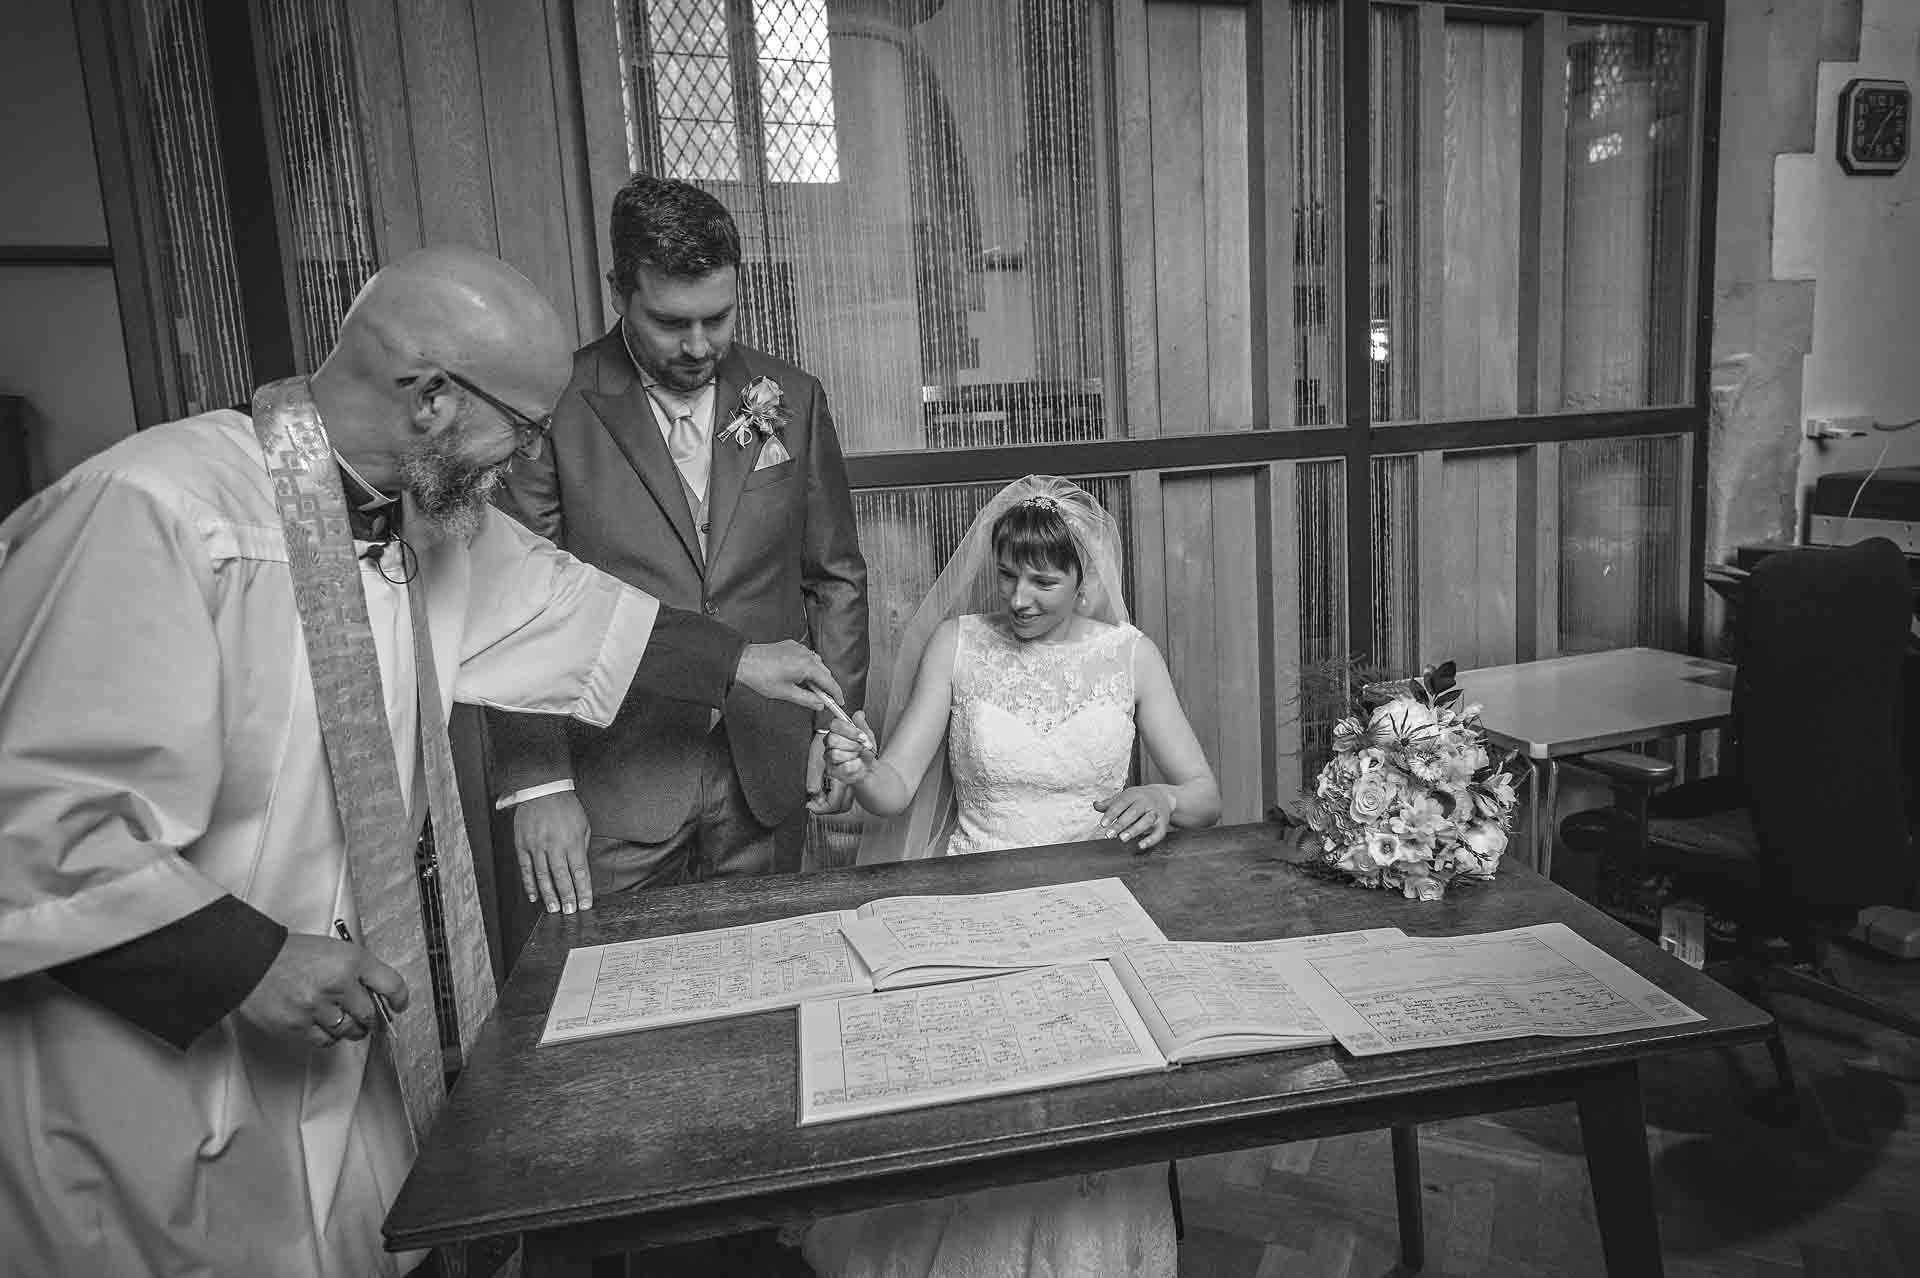 Vicar passing pen to bride to sign the church wedding register